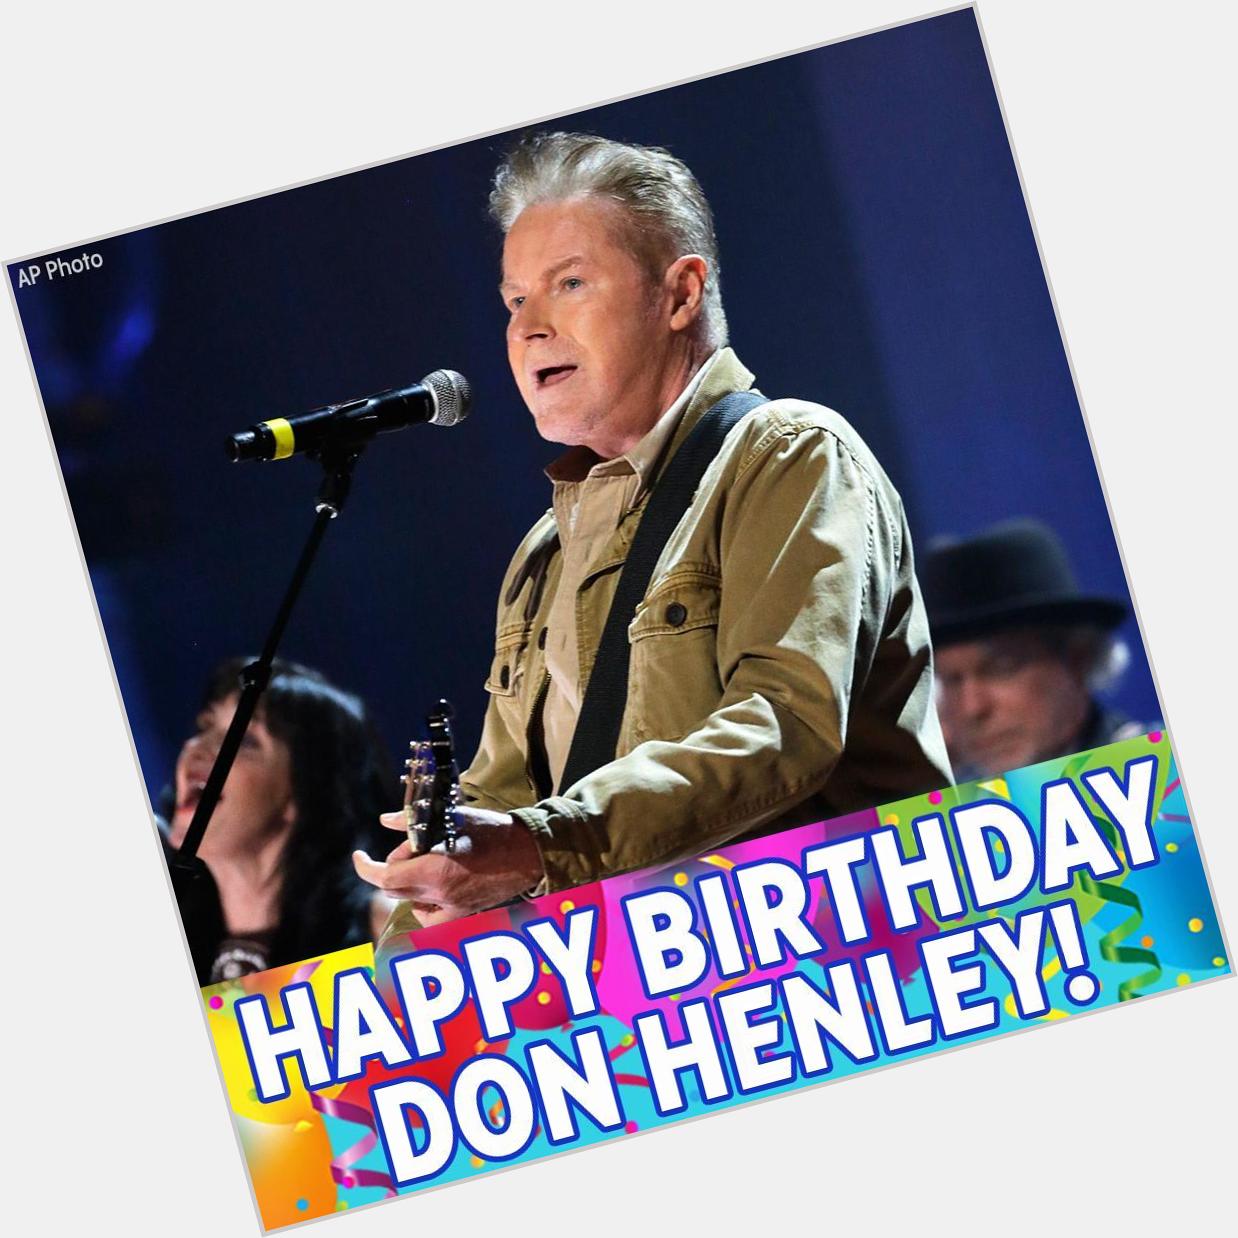 Happy Birthday to Don Henley of the Eagles! 